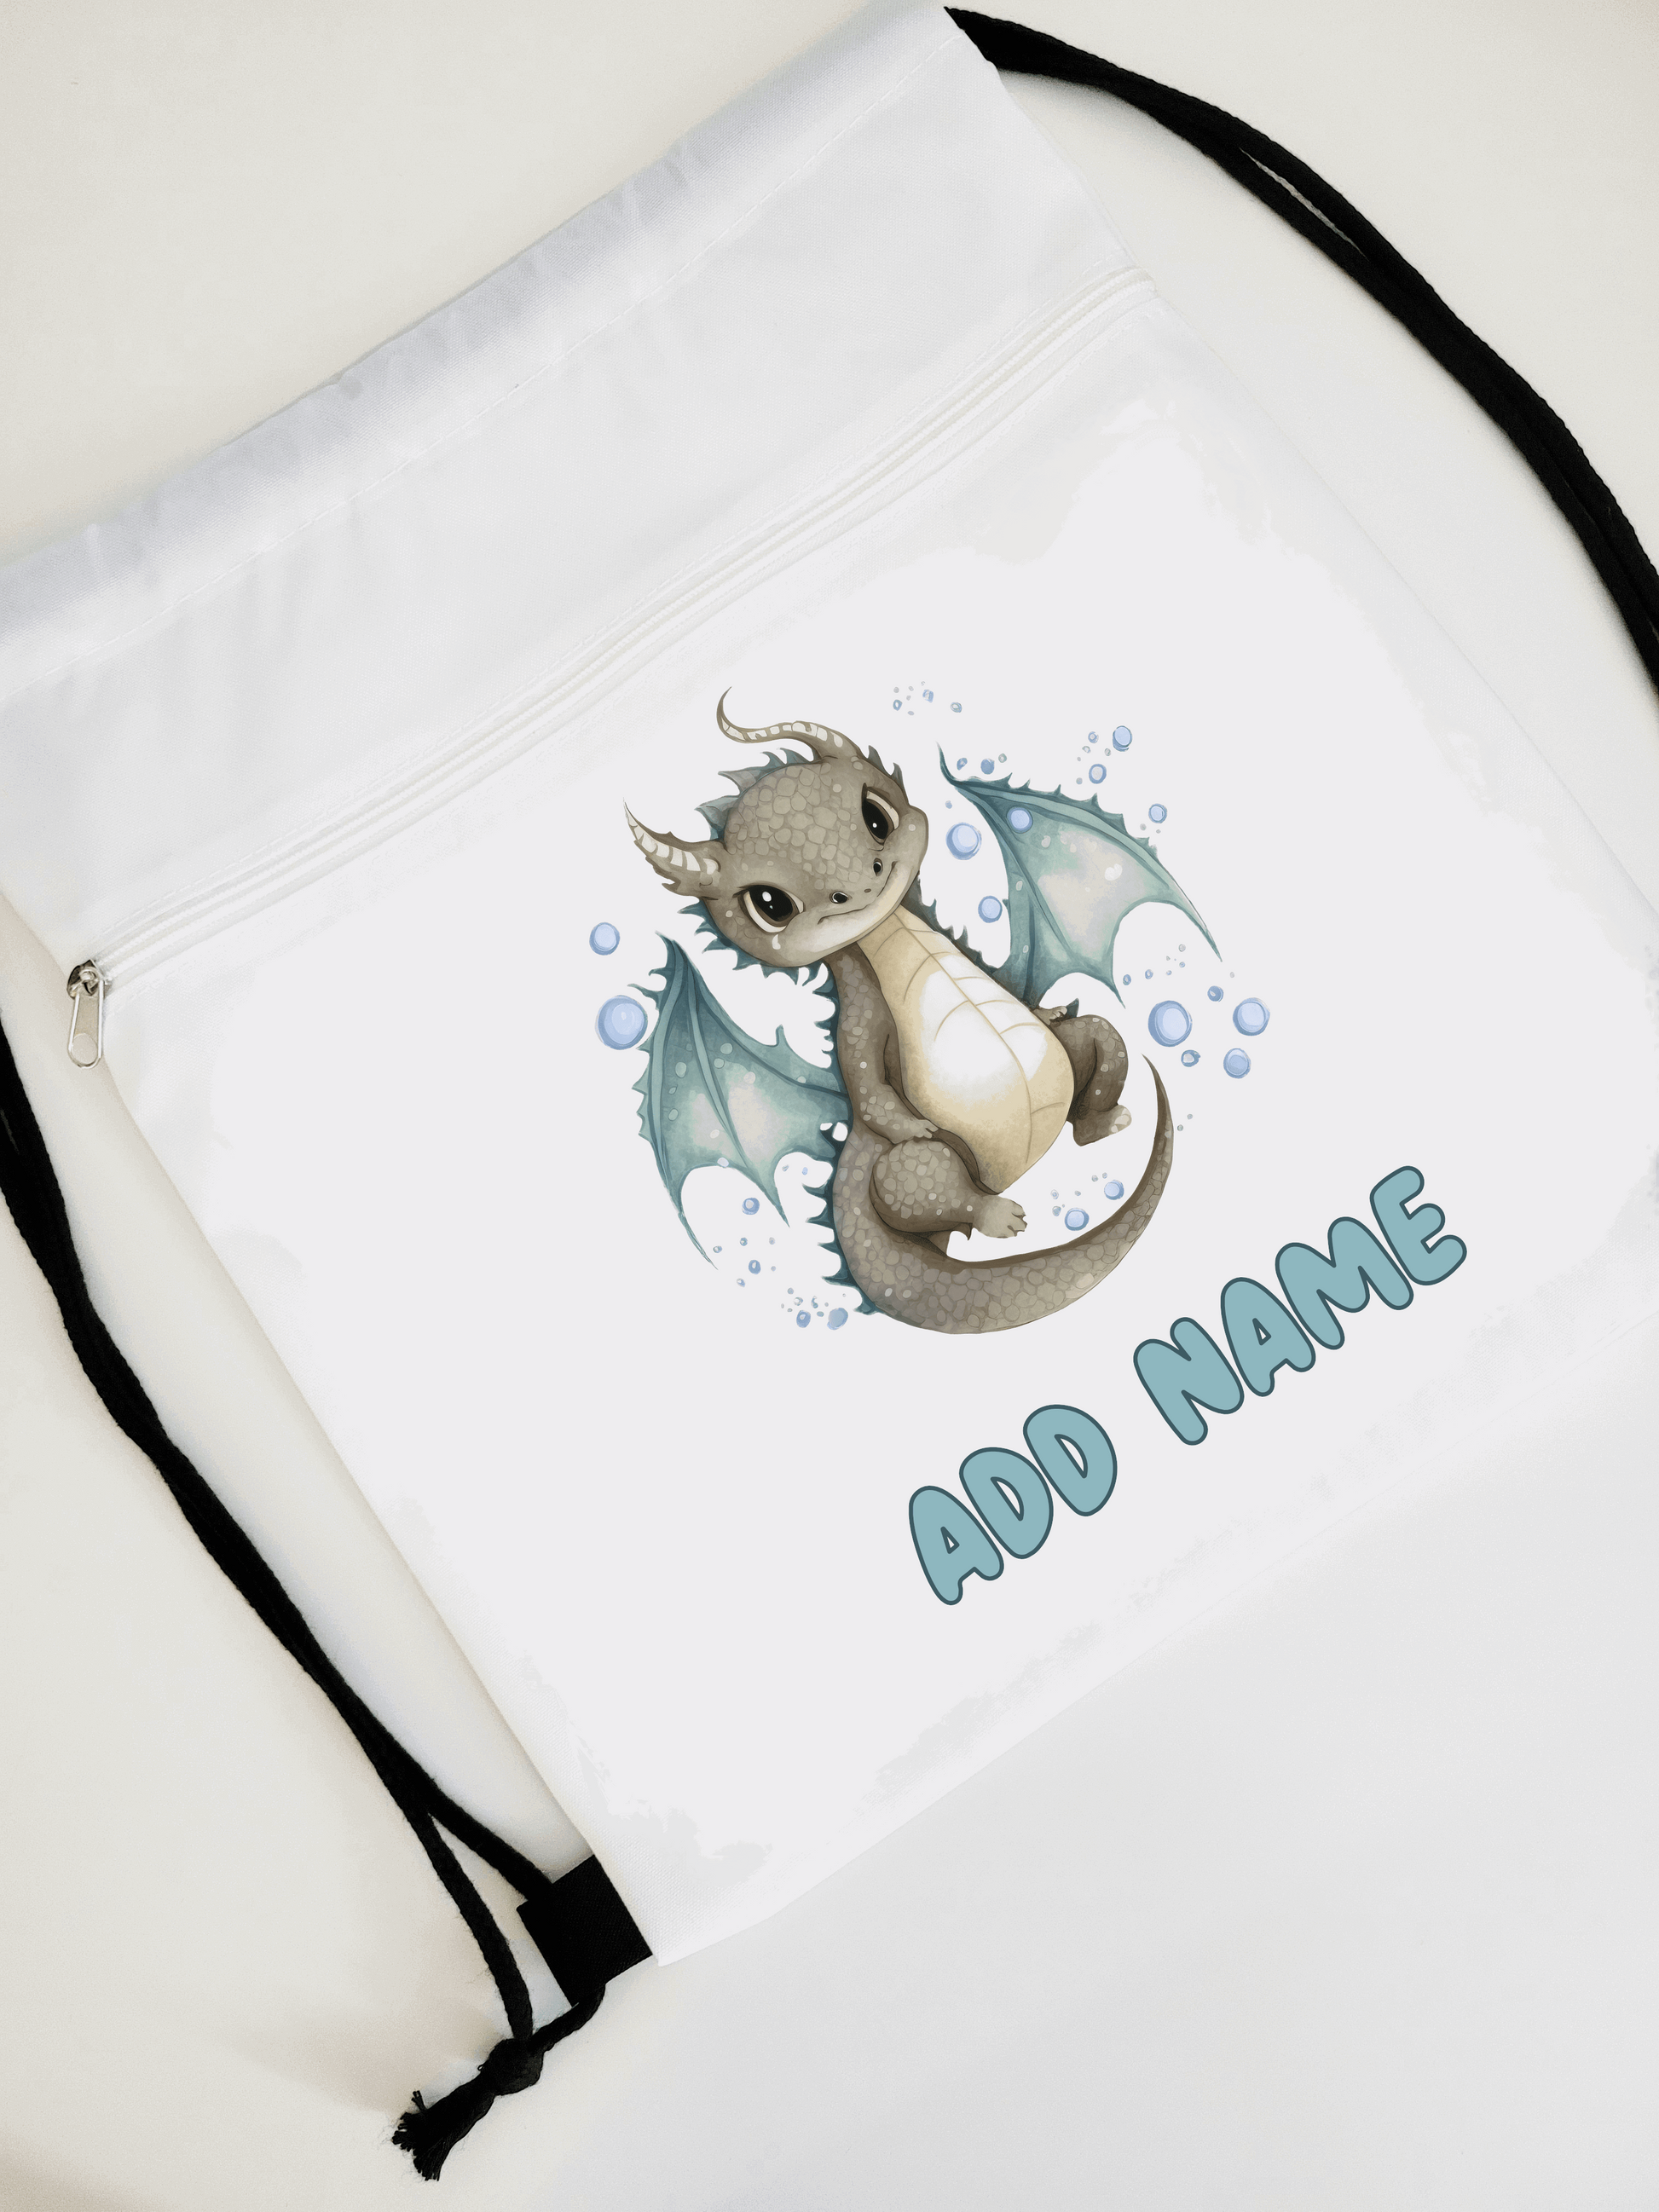 Sports bags - Moose and Goose Gifts